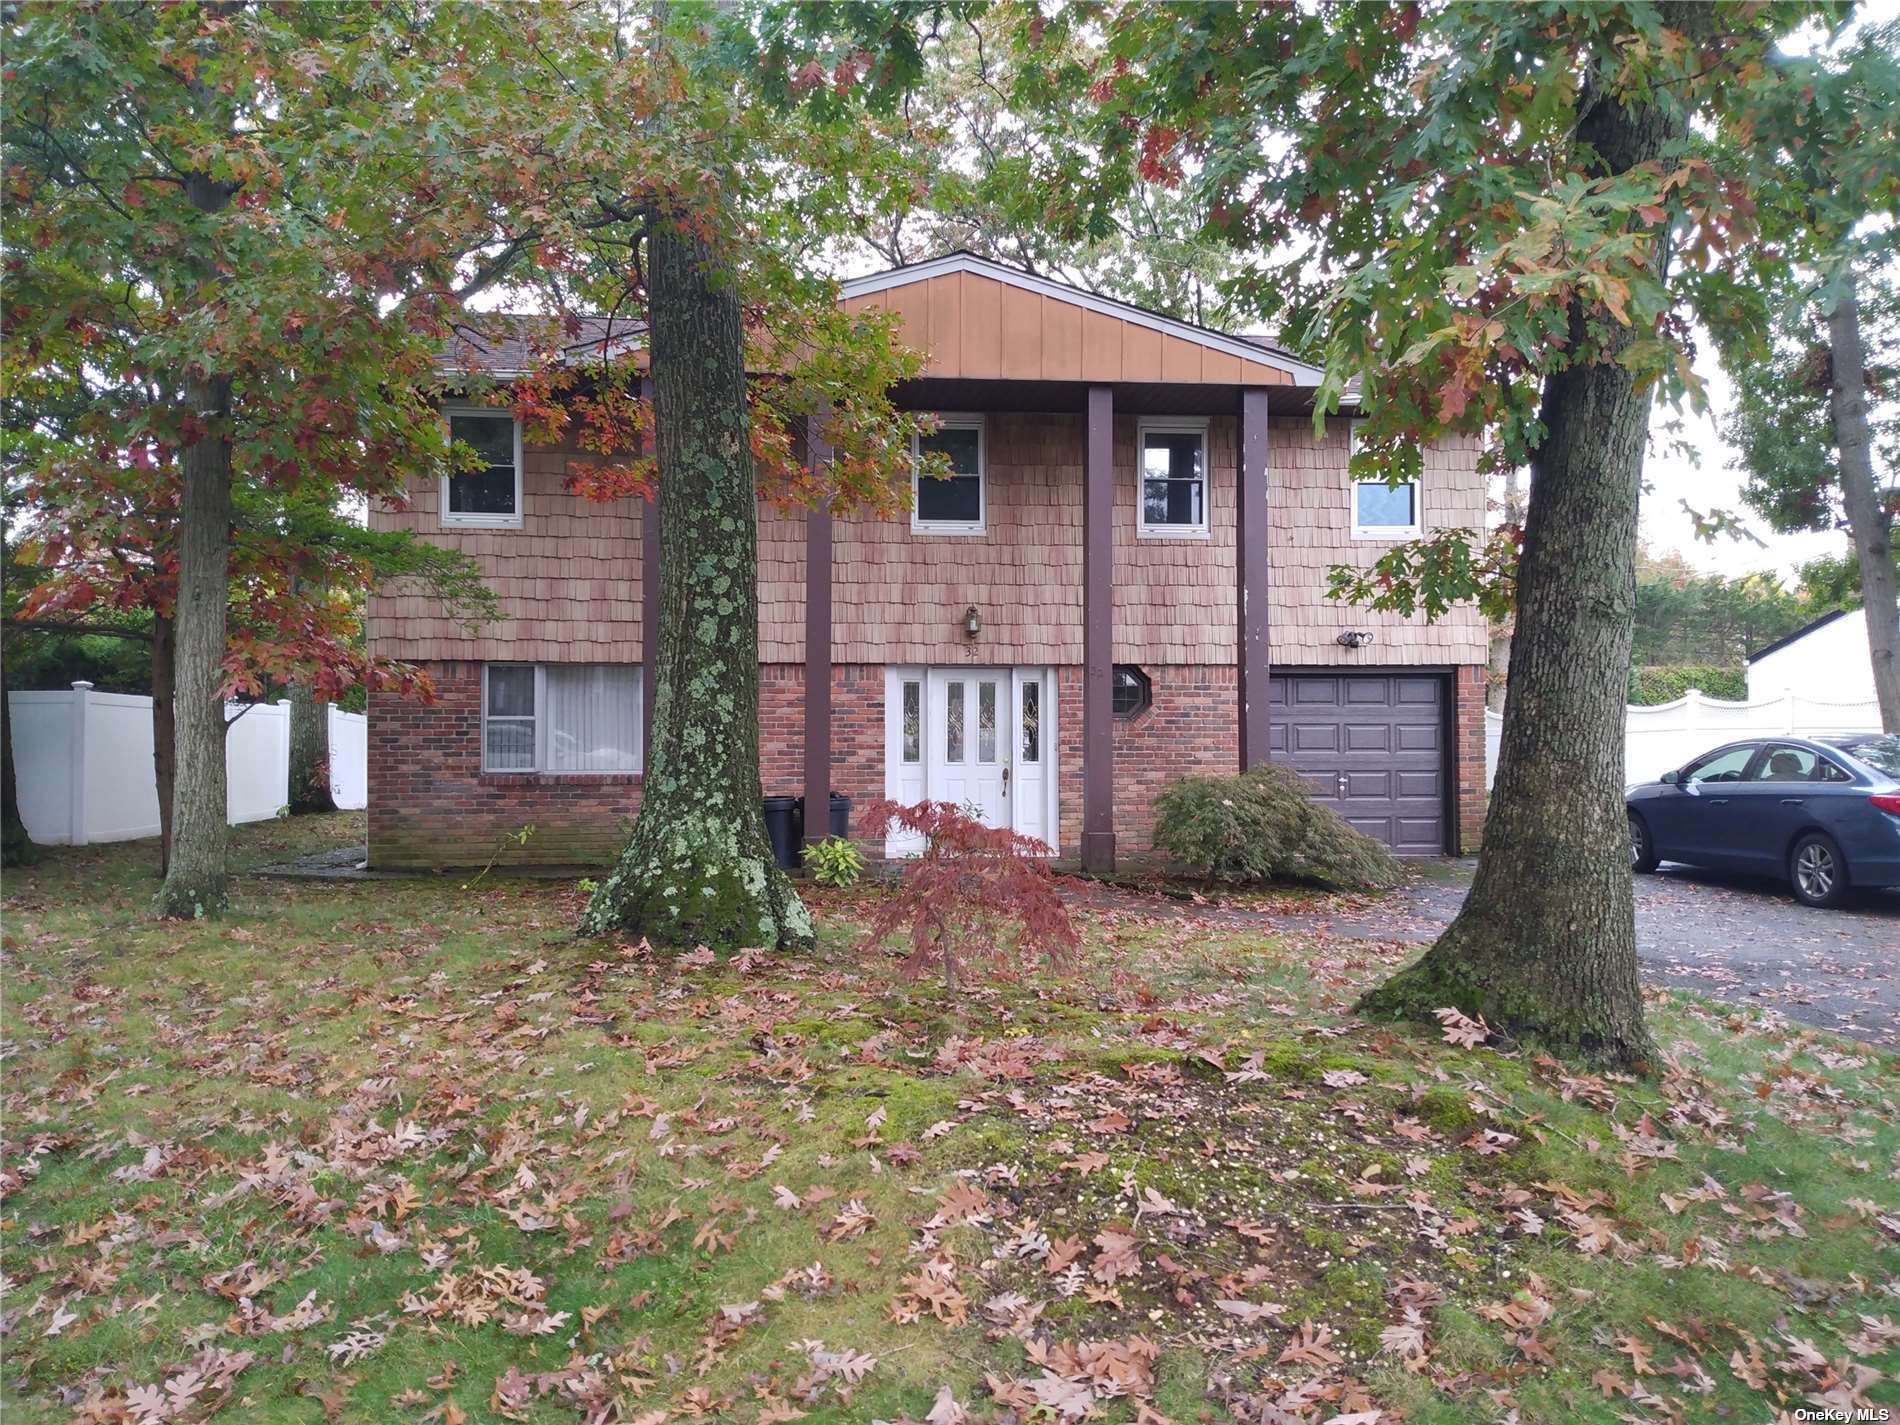 Listing in Commack, NY